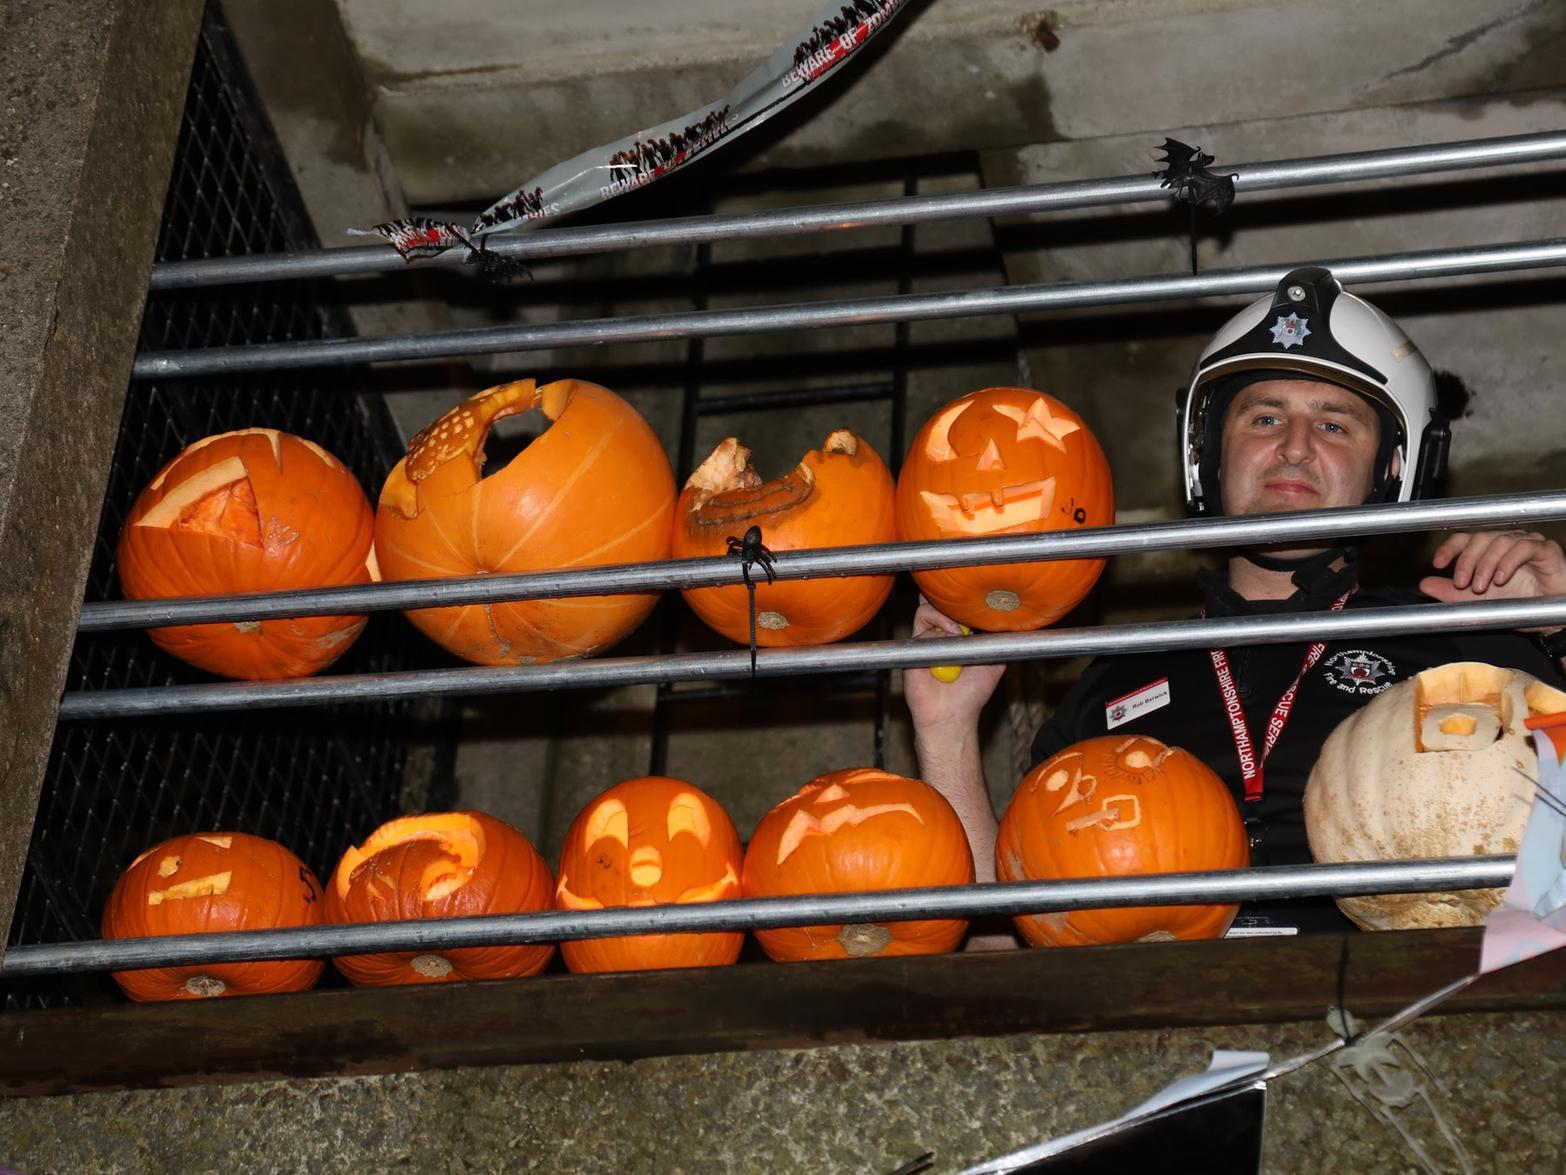 The pumpkins were taken up the drill tower at the towns retained fire station.